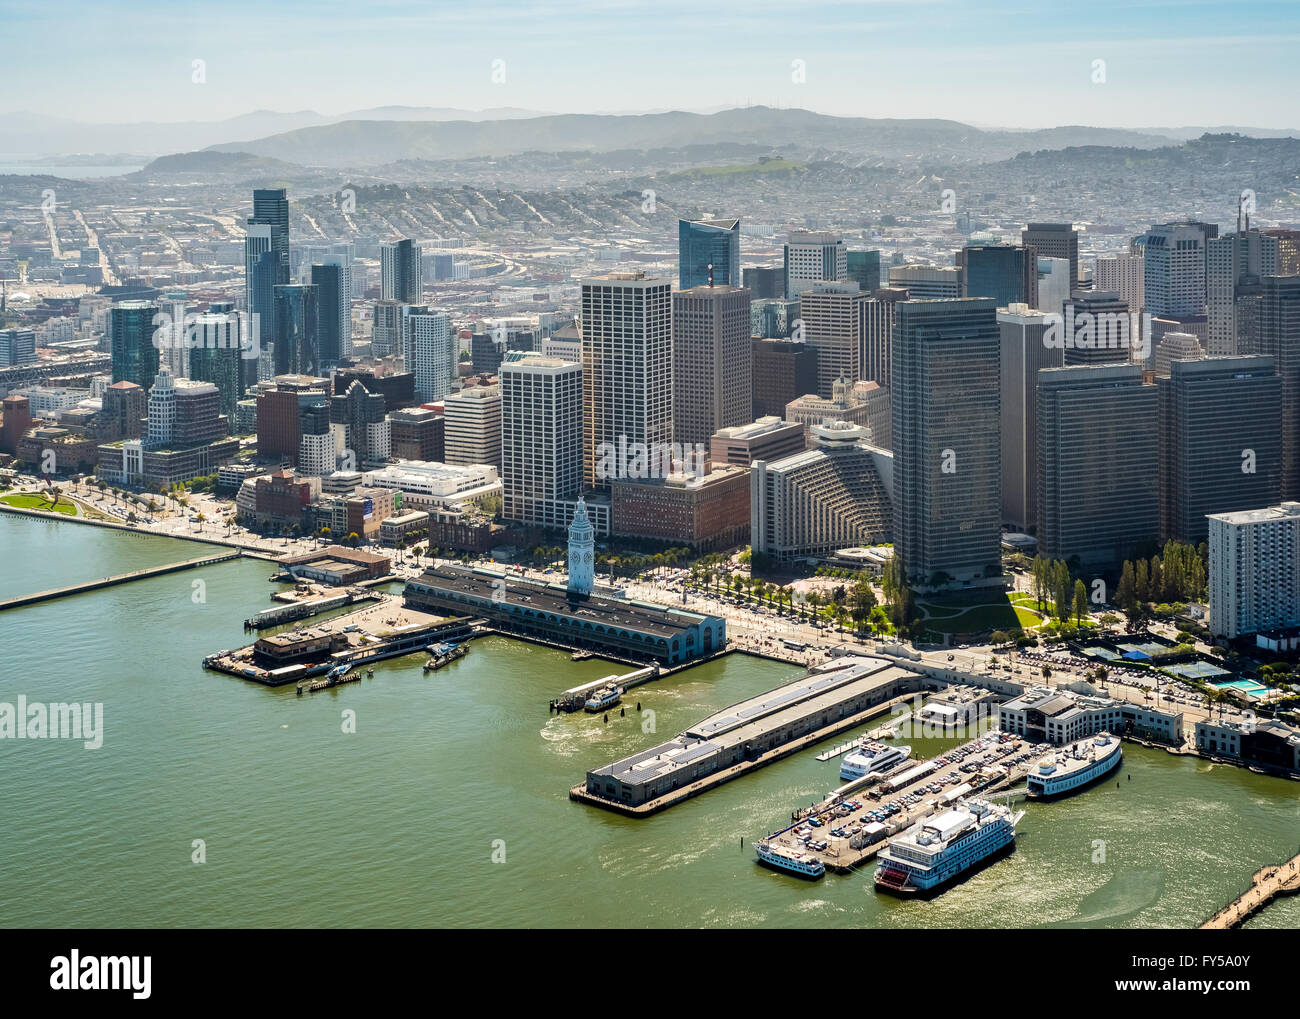 Aerial view of San Francisco Downtown with its piers as seen from the water, San Francisco, San Francisco Bay Area, California Stock Photo